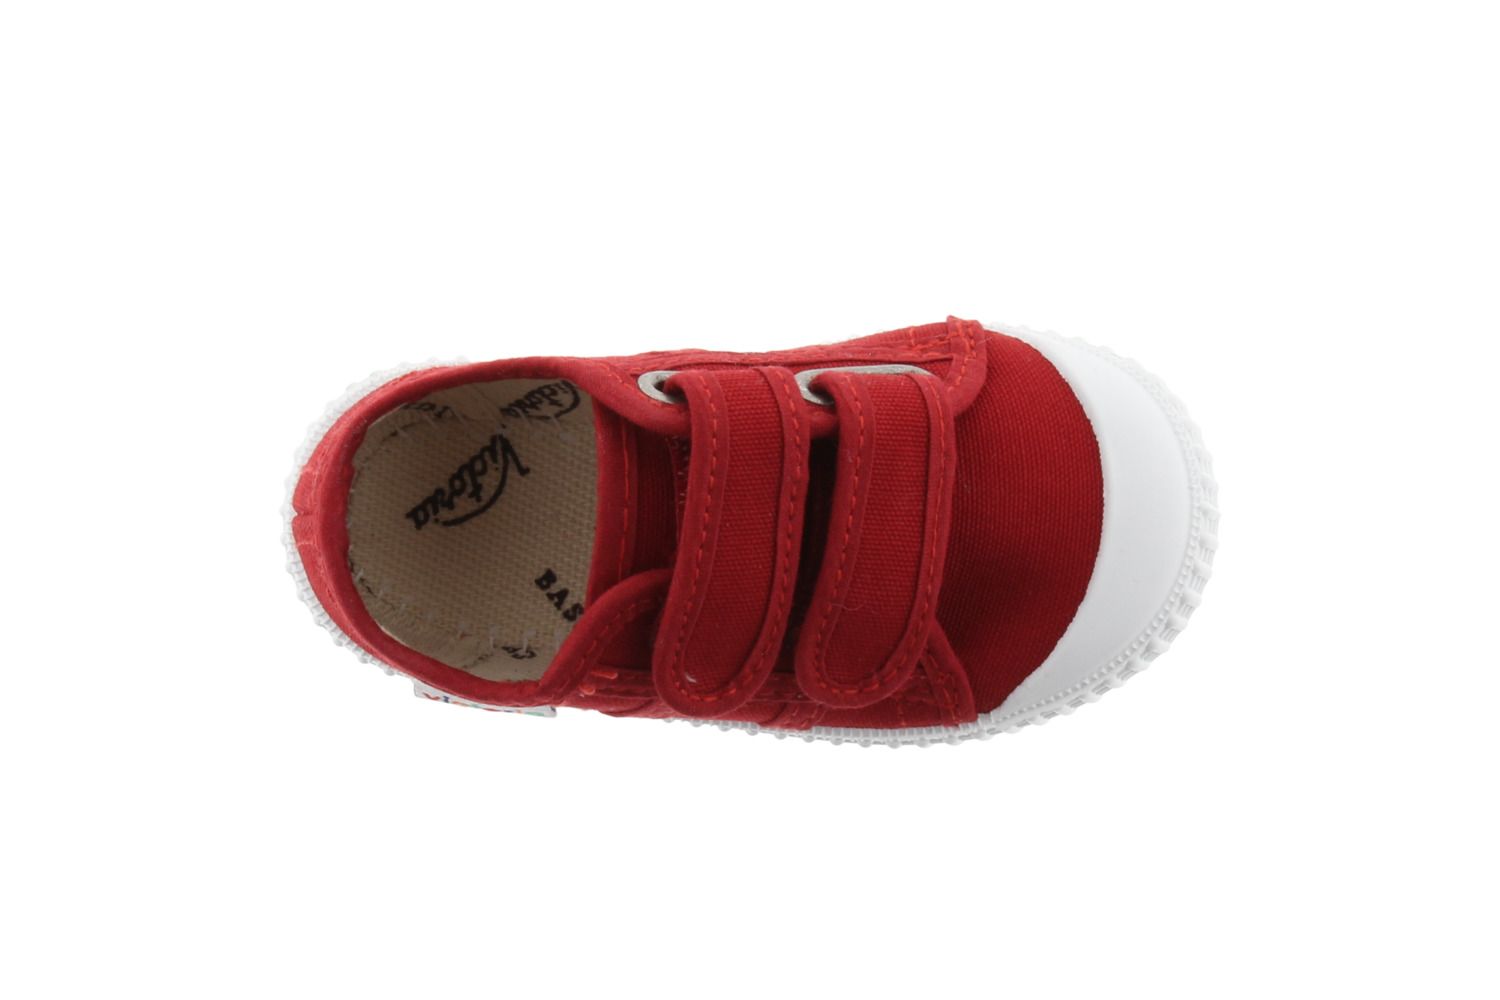 Hagdon Kids Low Canvas Sneakers Lace Up Toddler Boys Size 9.5 EUR 26 * -  beyond exchange